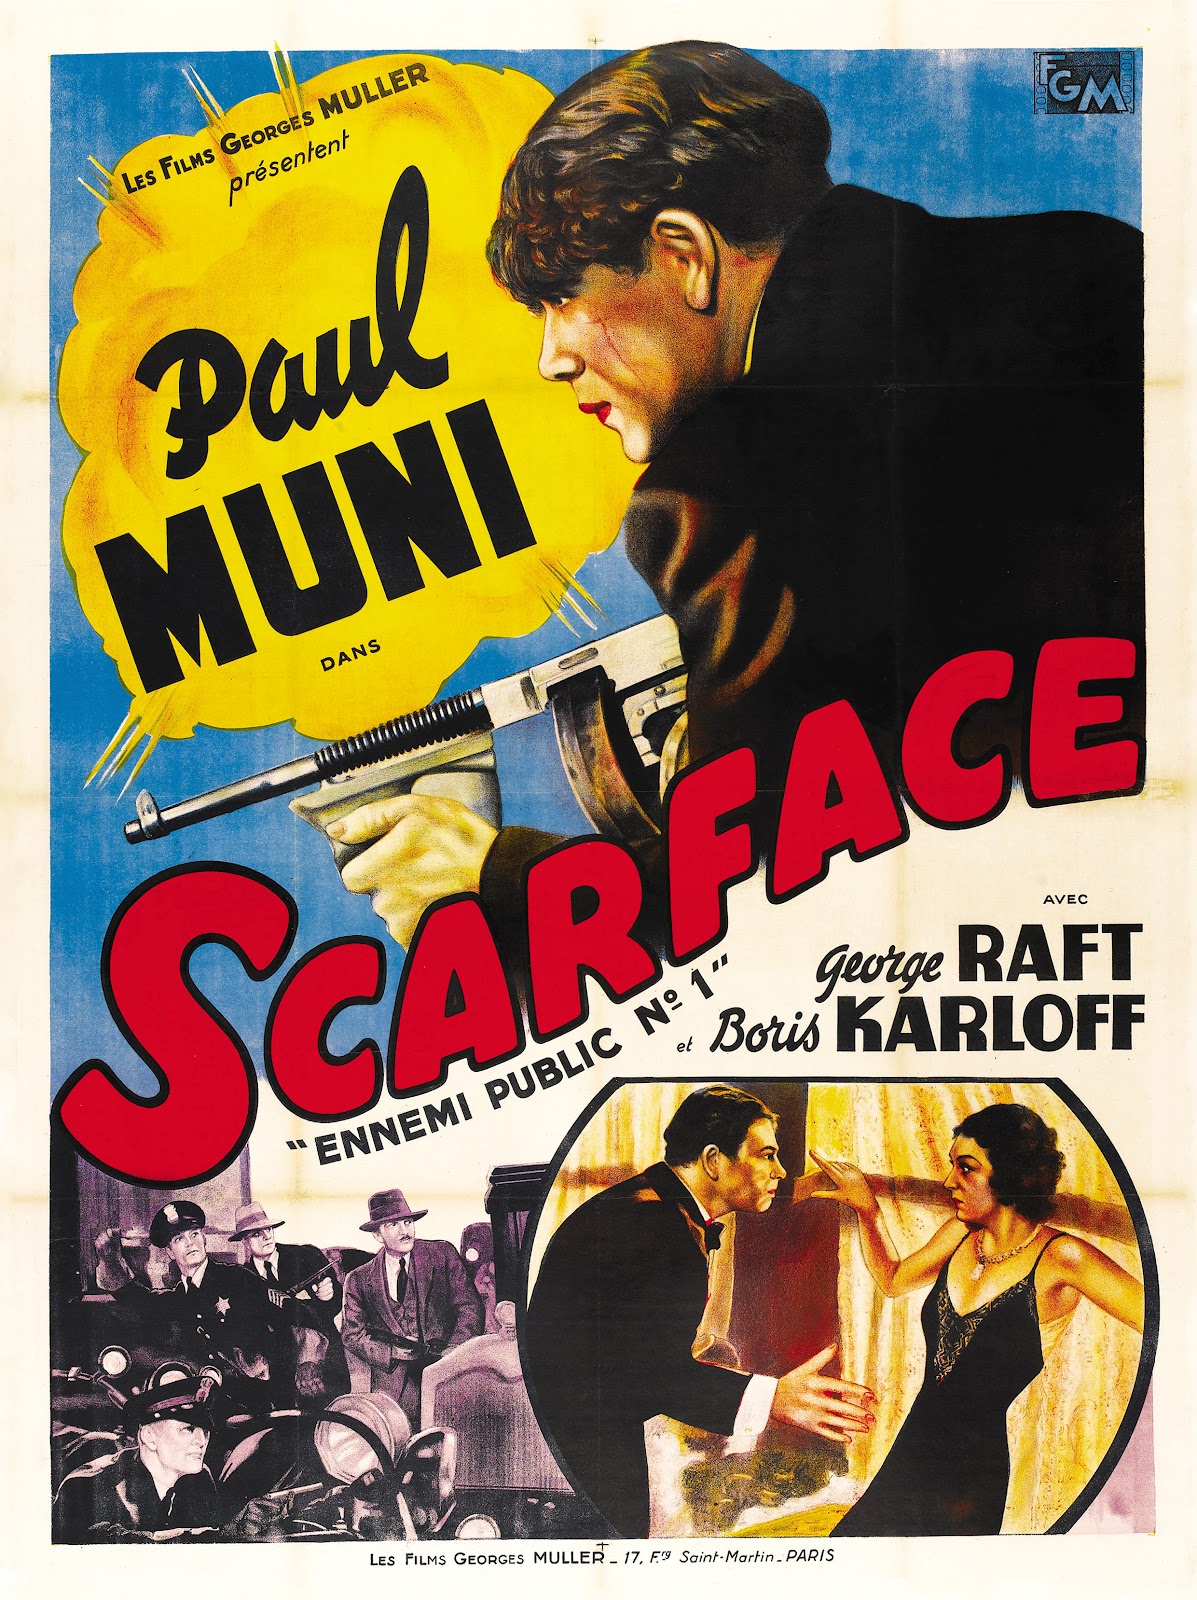 Poster+-+Scarface+(1932)_03.jpg